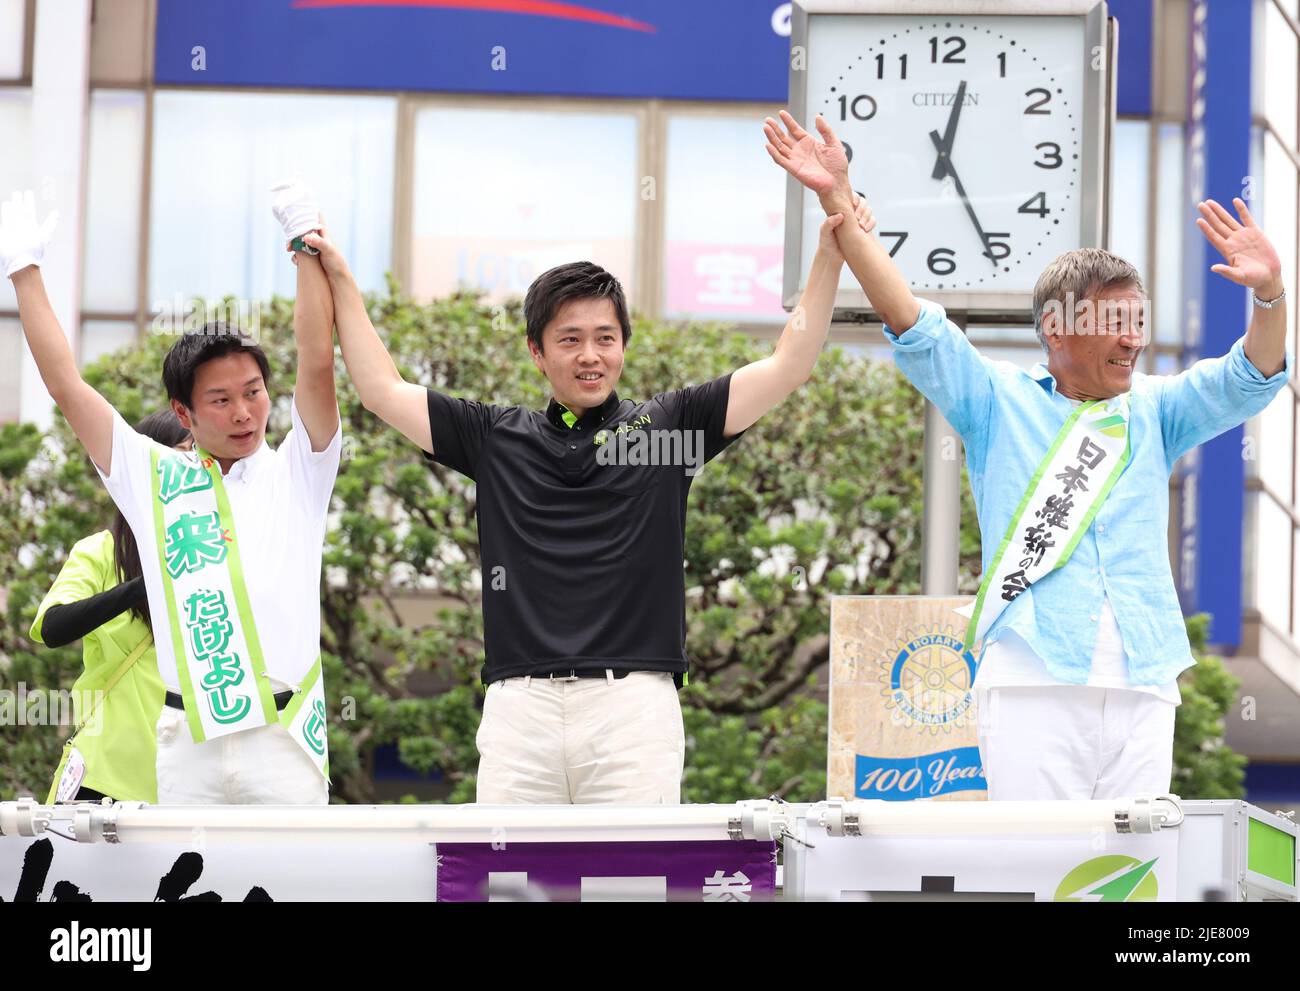 Tokorozawa, Japan. 26th June, 2022. Osaka Governor and deputy leader of opposition Japan Innovation Party Hirofumi Yoshimura (C) raises arms with his party candidates Takeyoshi Kaku (L) and Kenta Aoshima (R) after he delivered a campaign speech for the July 10 Upper House election in Tokorozawa, suburban Tokyo on Sunday, June 26, 2022. Credit: Yoshio Tsunoda/AFLO/Alamy Live News Stock Photo